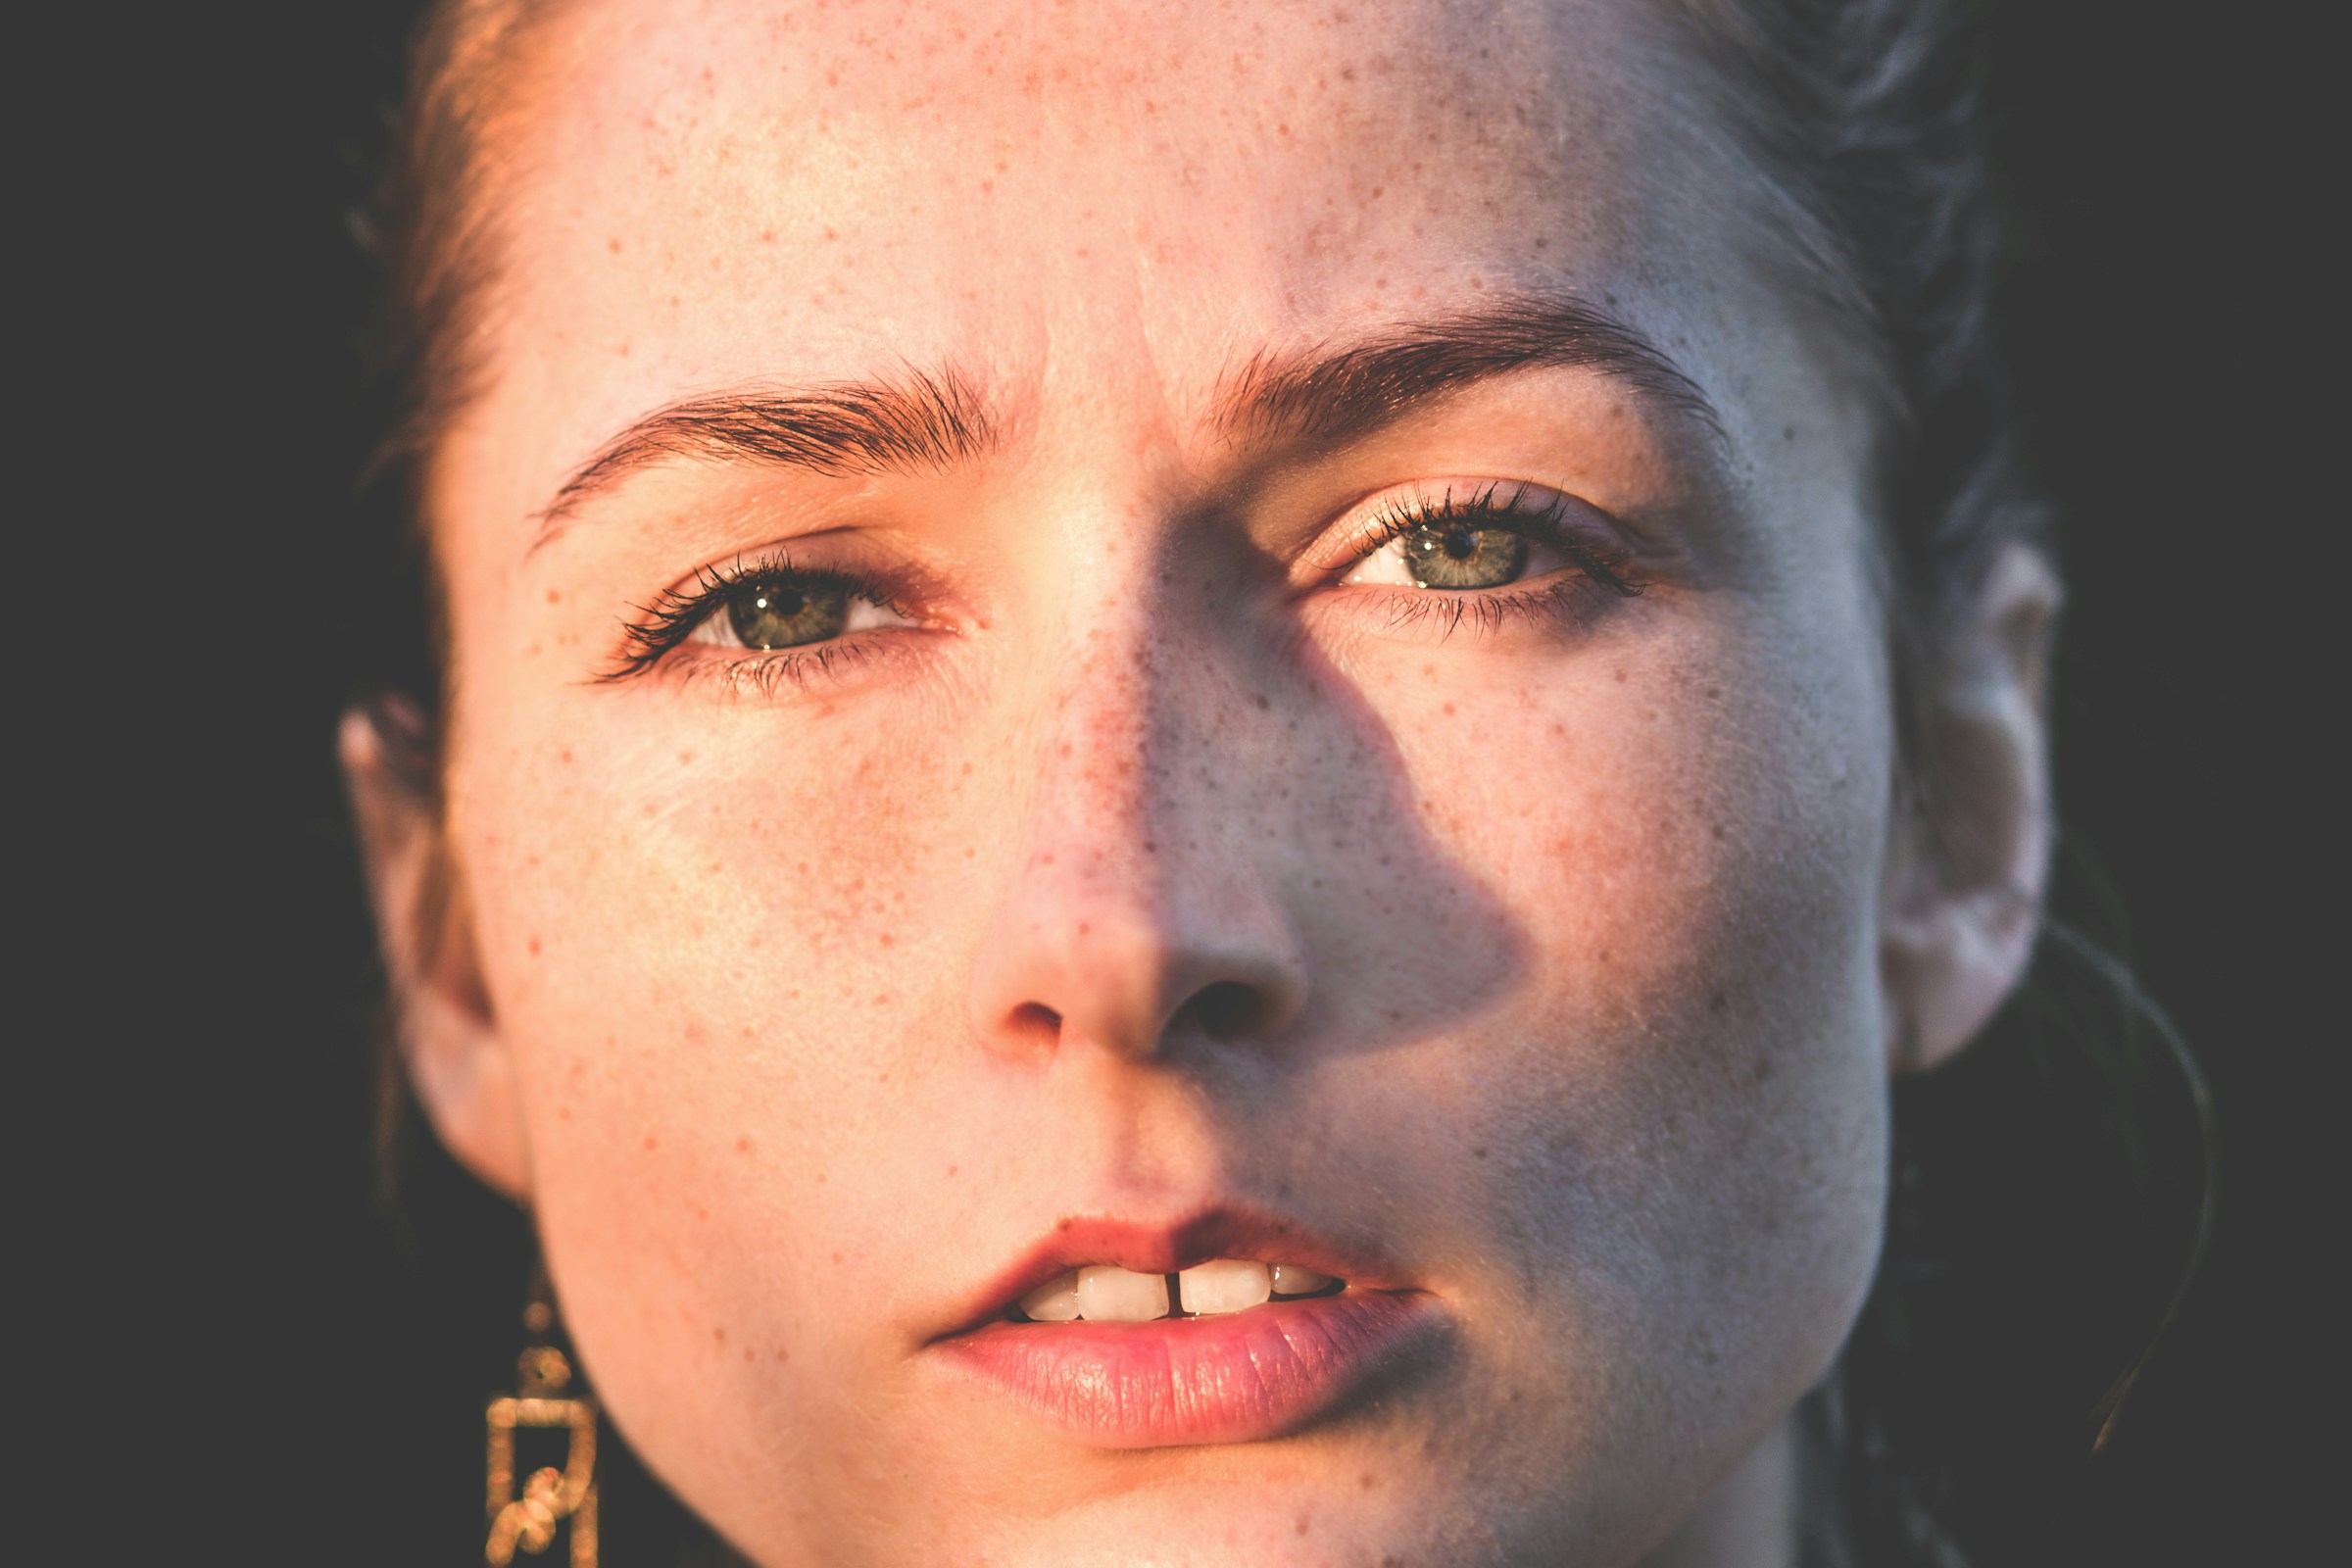 A close-up of a slightly frowning woman | Source: Unsplash